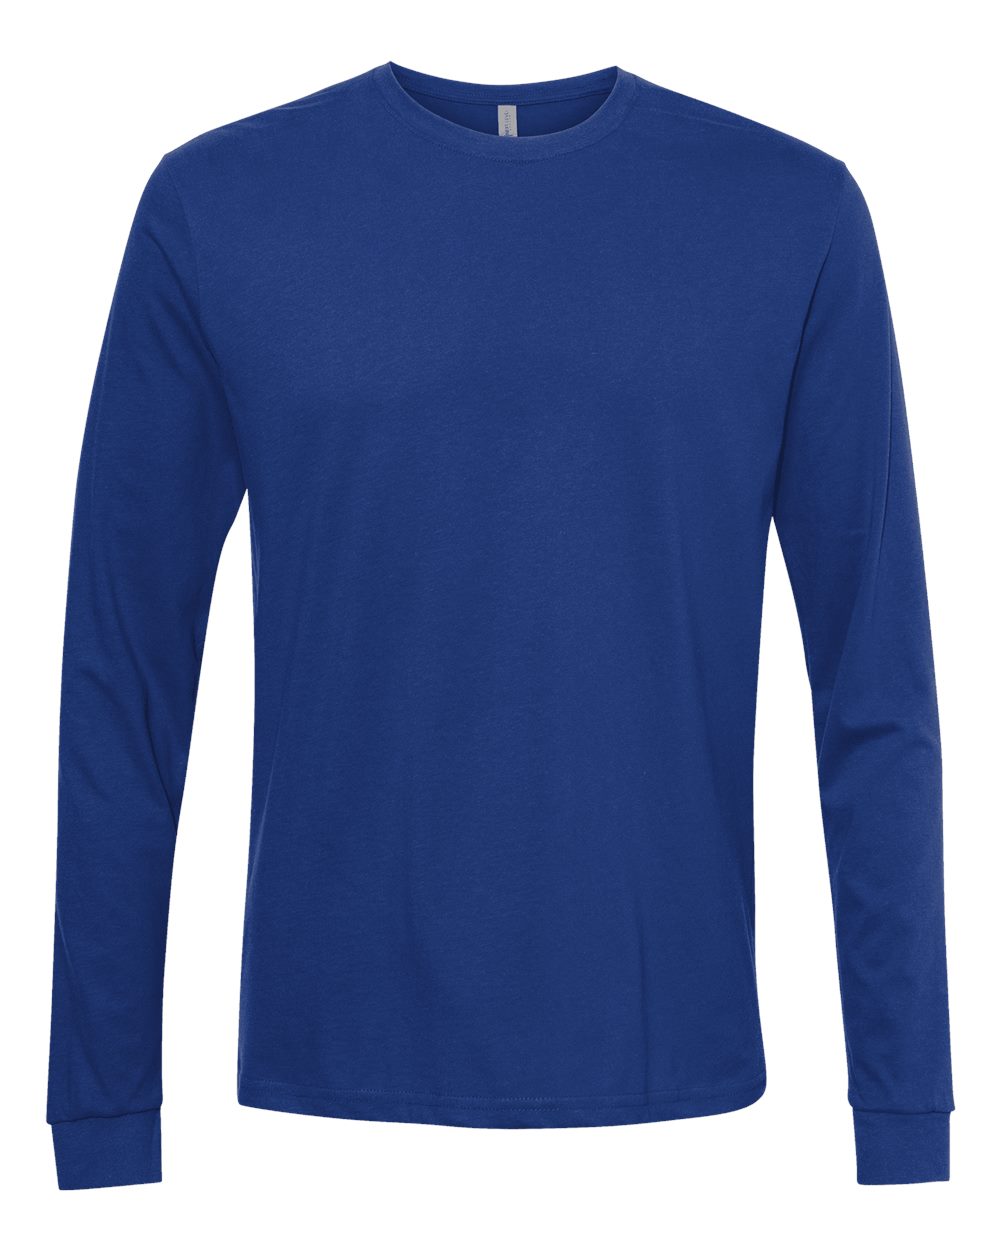 *Best* Next Level Sueded Long Sleeve Shirts